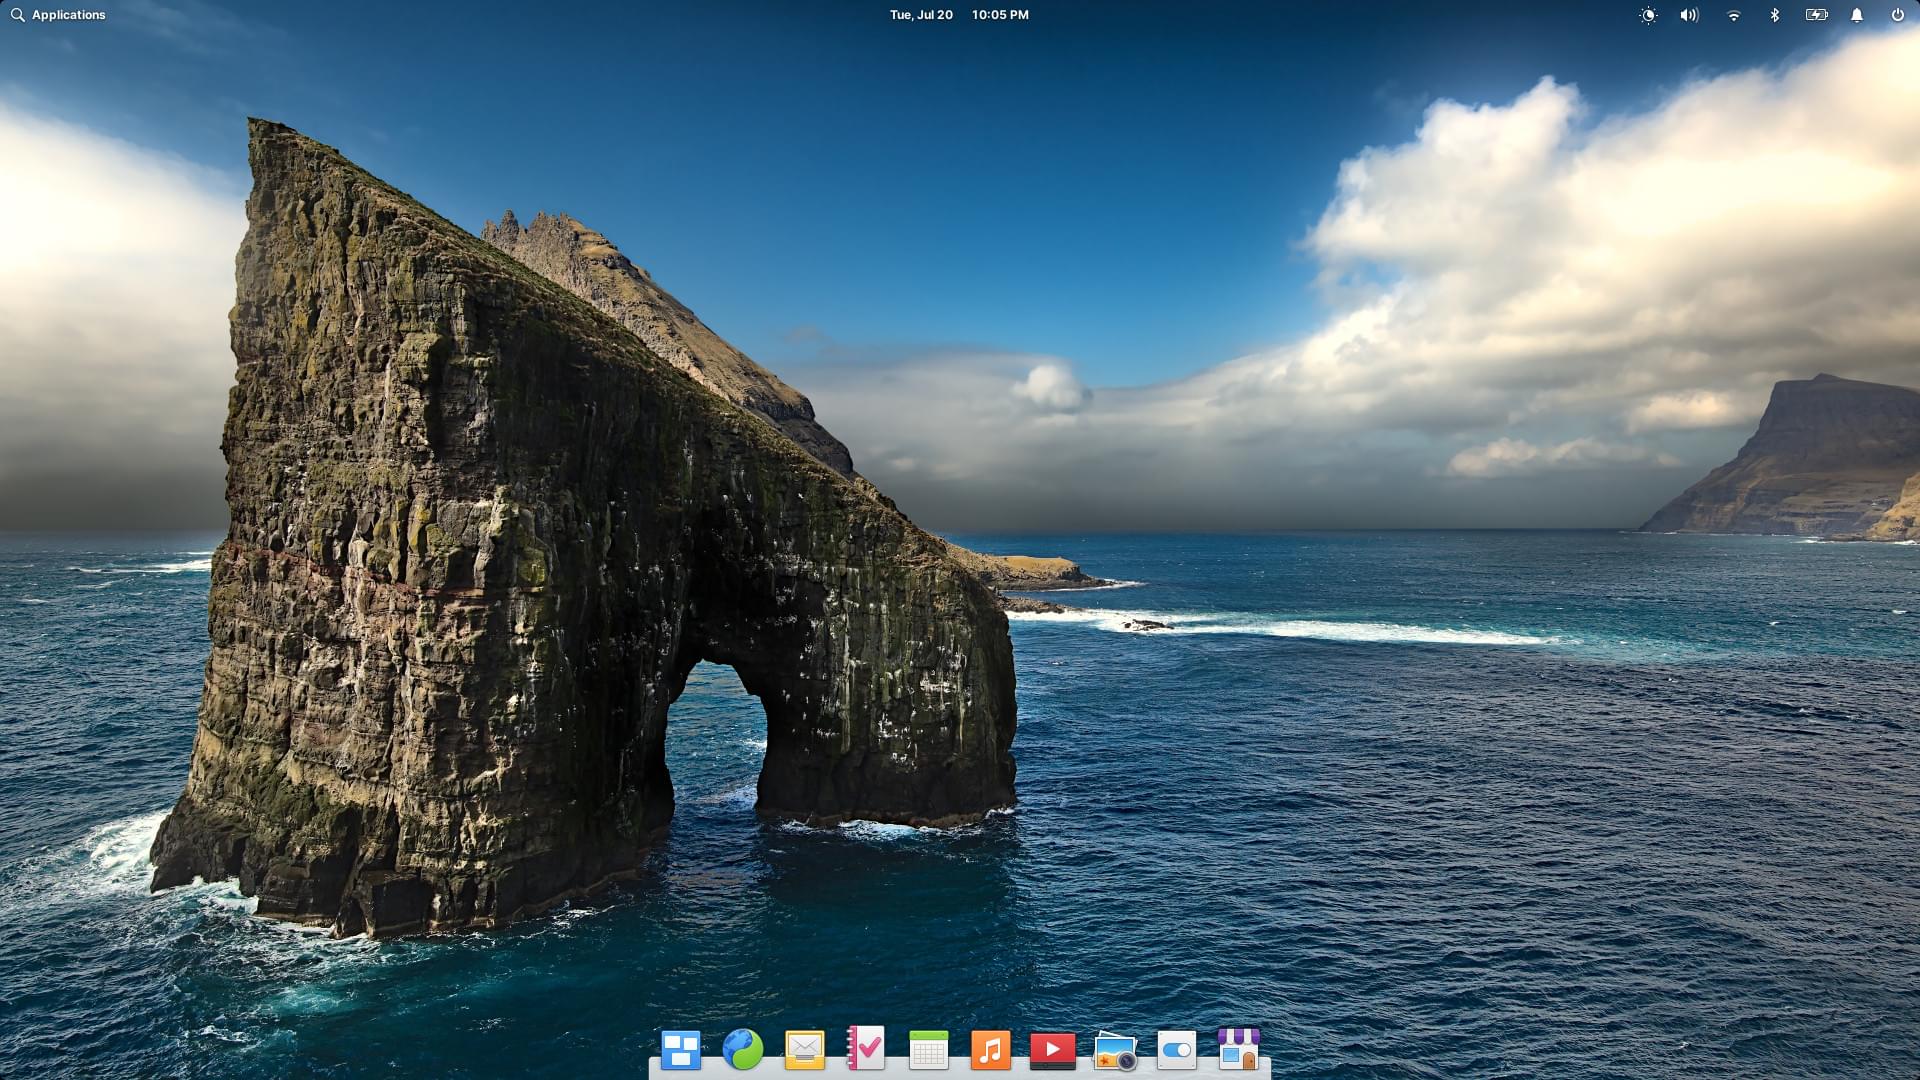 Elementary OS desktop UI; dock at the bottom, and the top bar